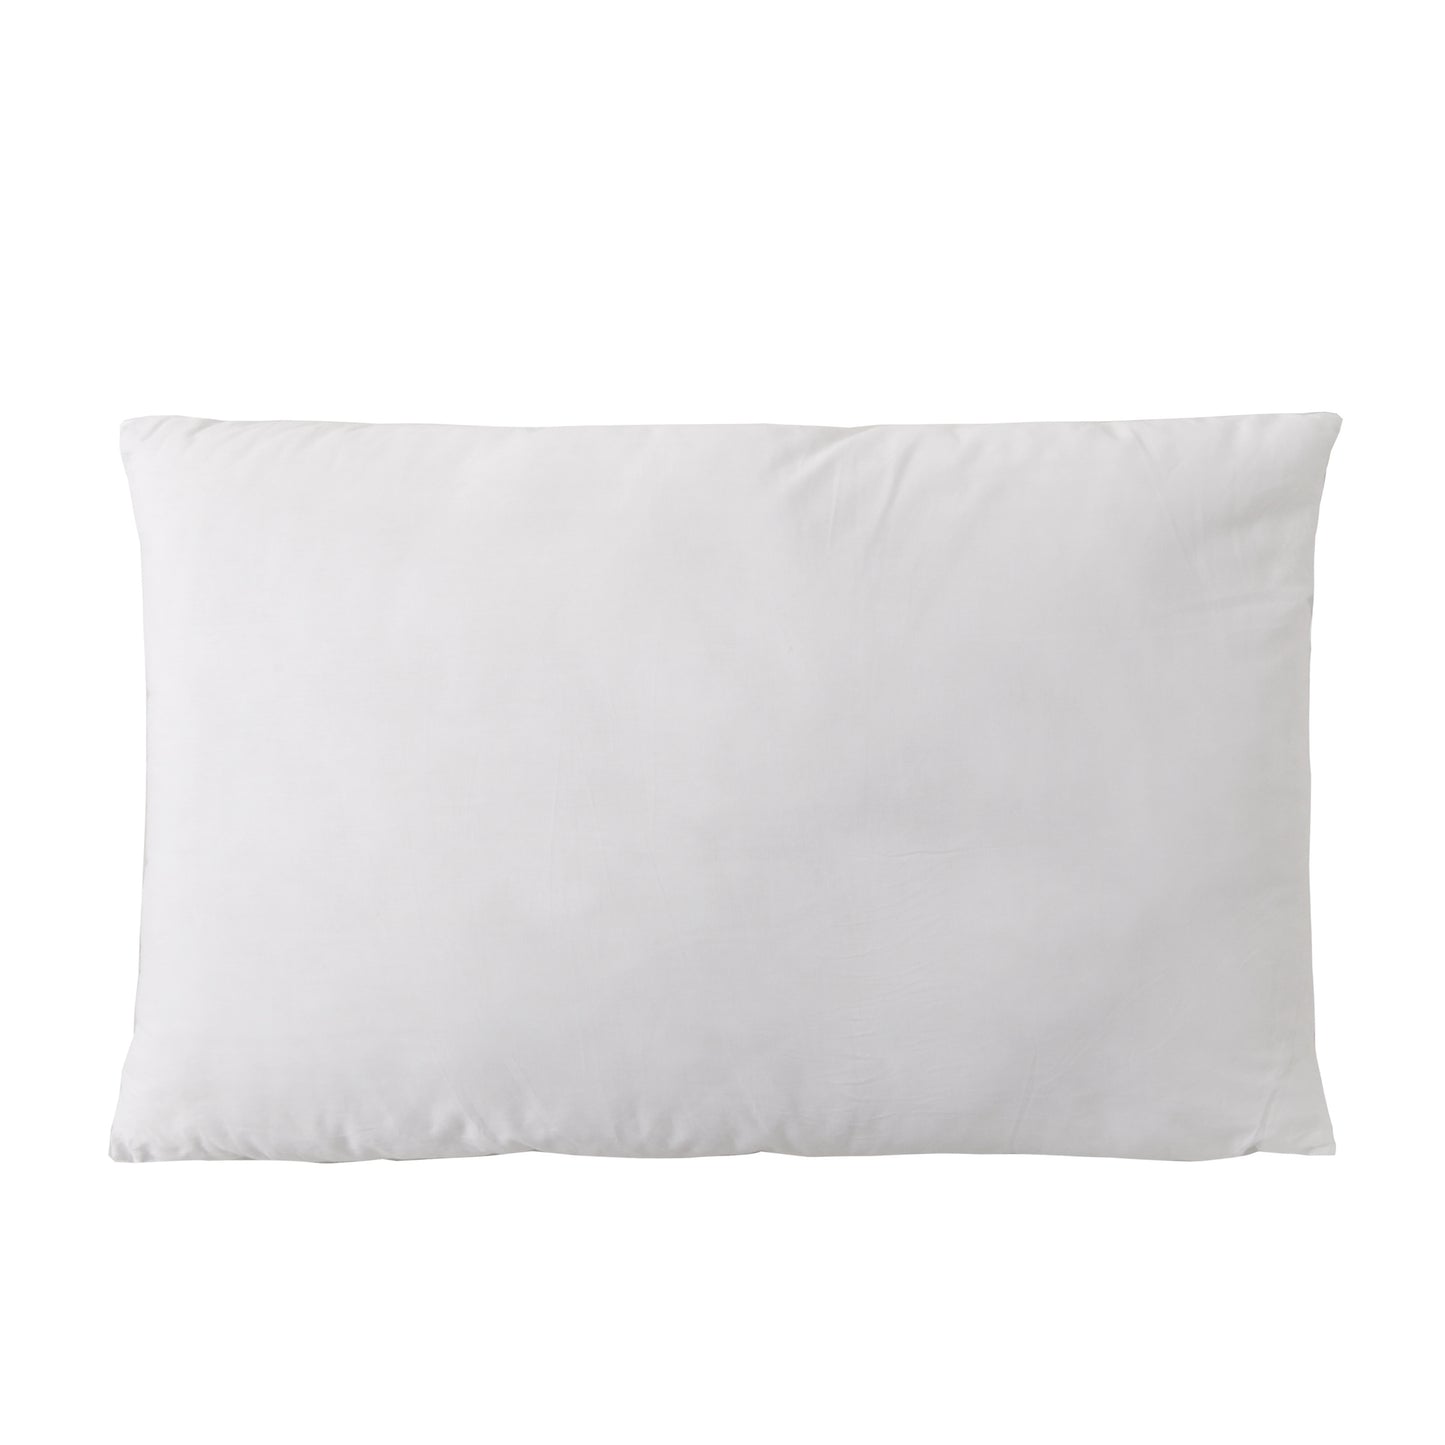 Microfibre Gusseted Pillow with Removable Cotton Cover -  Medium Profile - Twin Pack